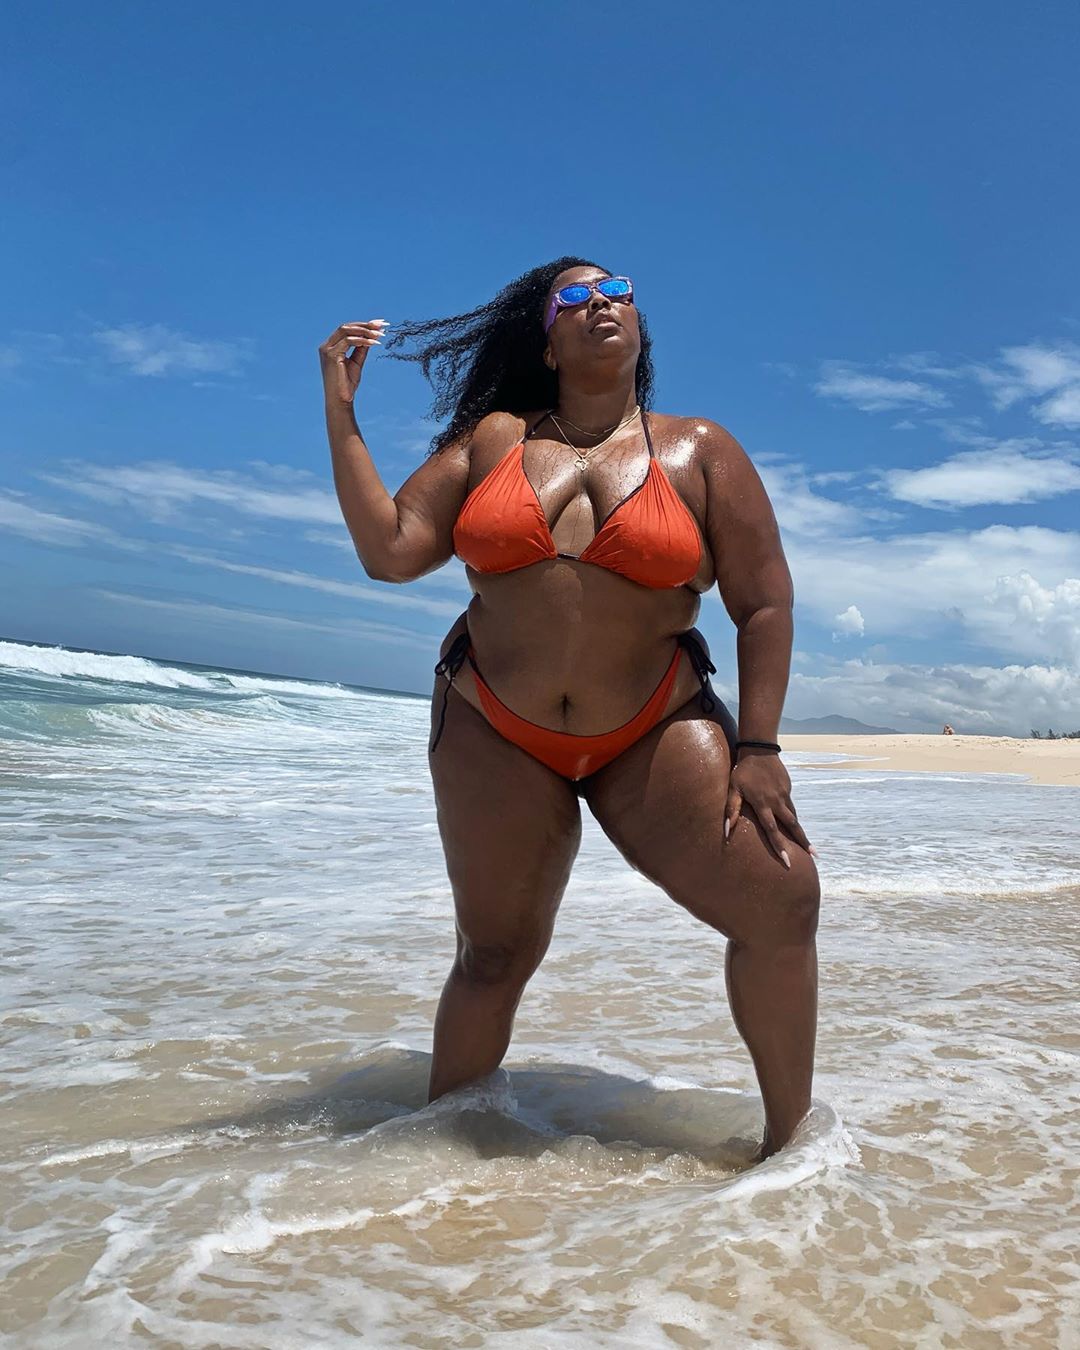 Lizzo hits out at TikTok for 'removing bathing suit videos - but not other  girls', Ents & Arts News